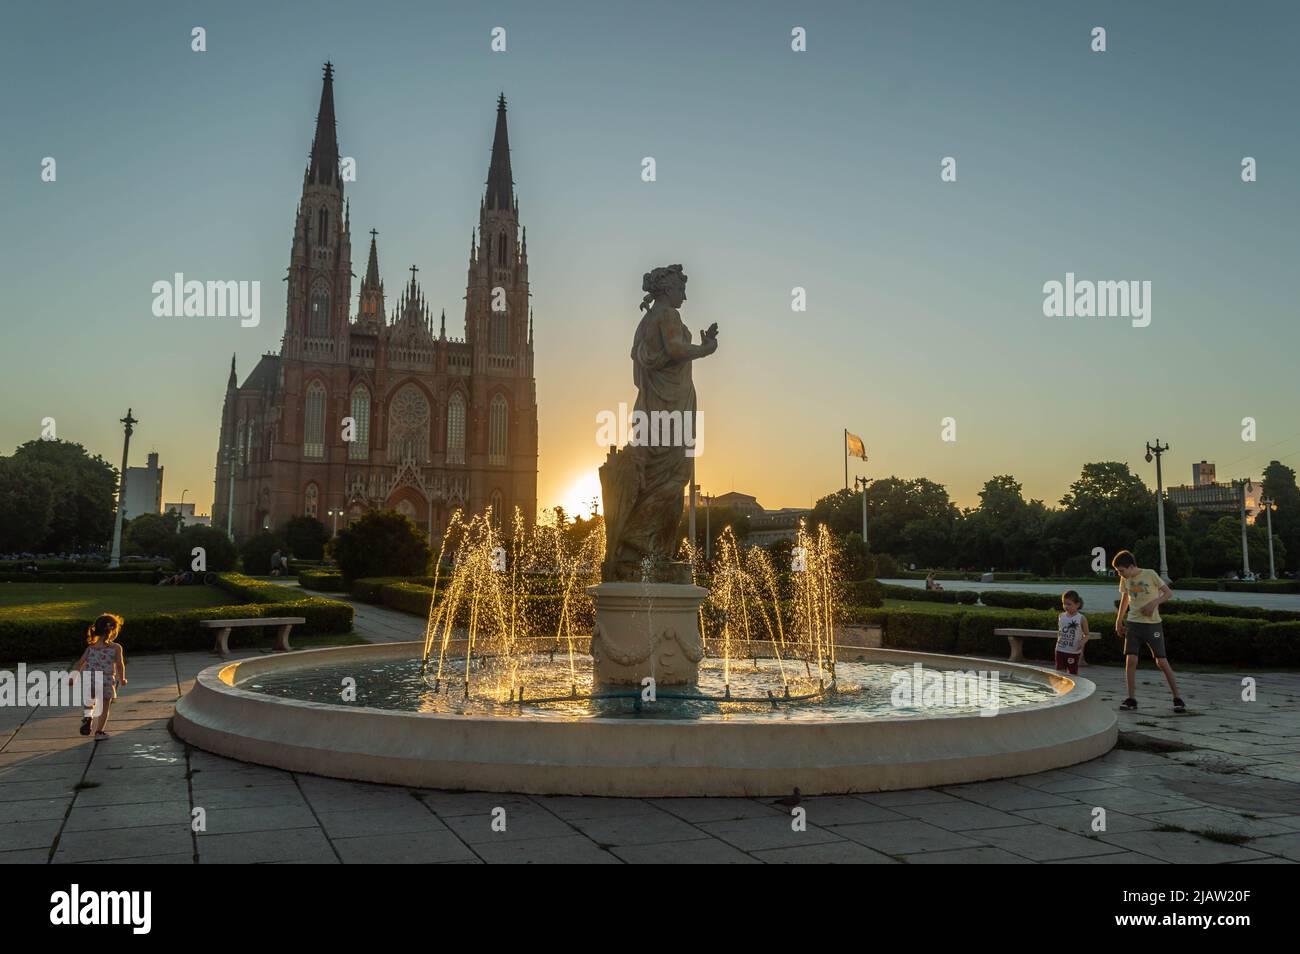 Square at sunset with children playing Stock Photo